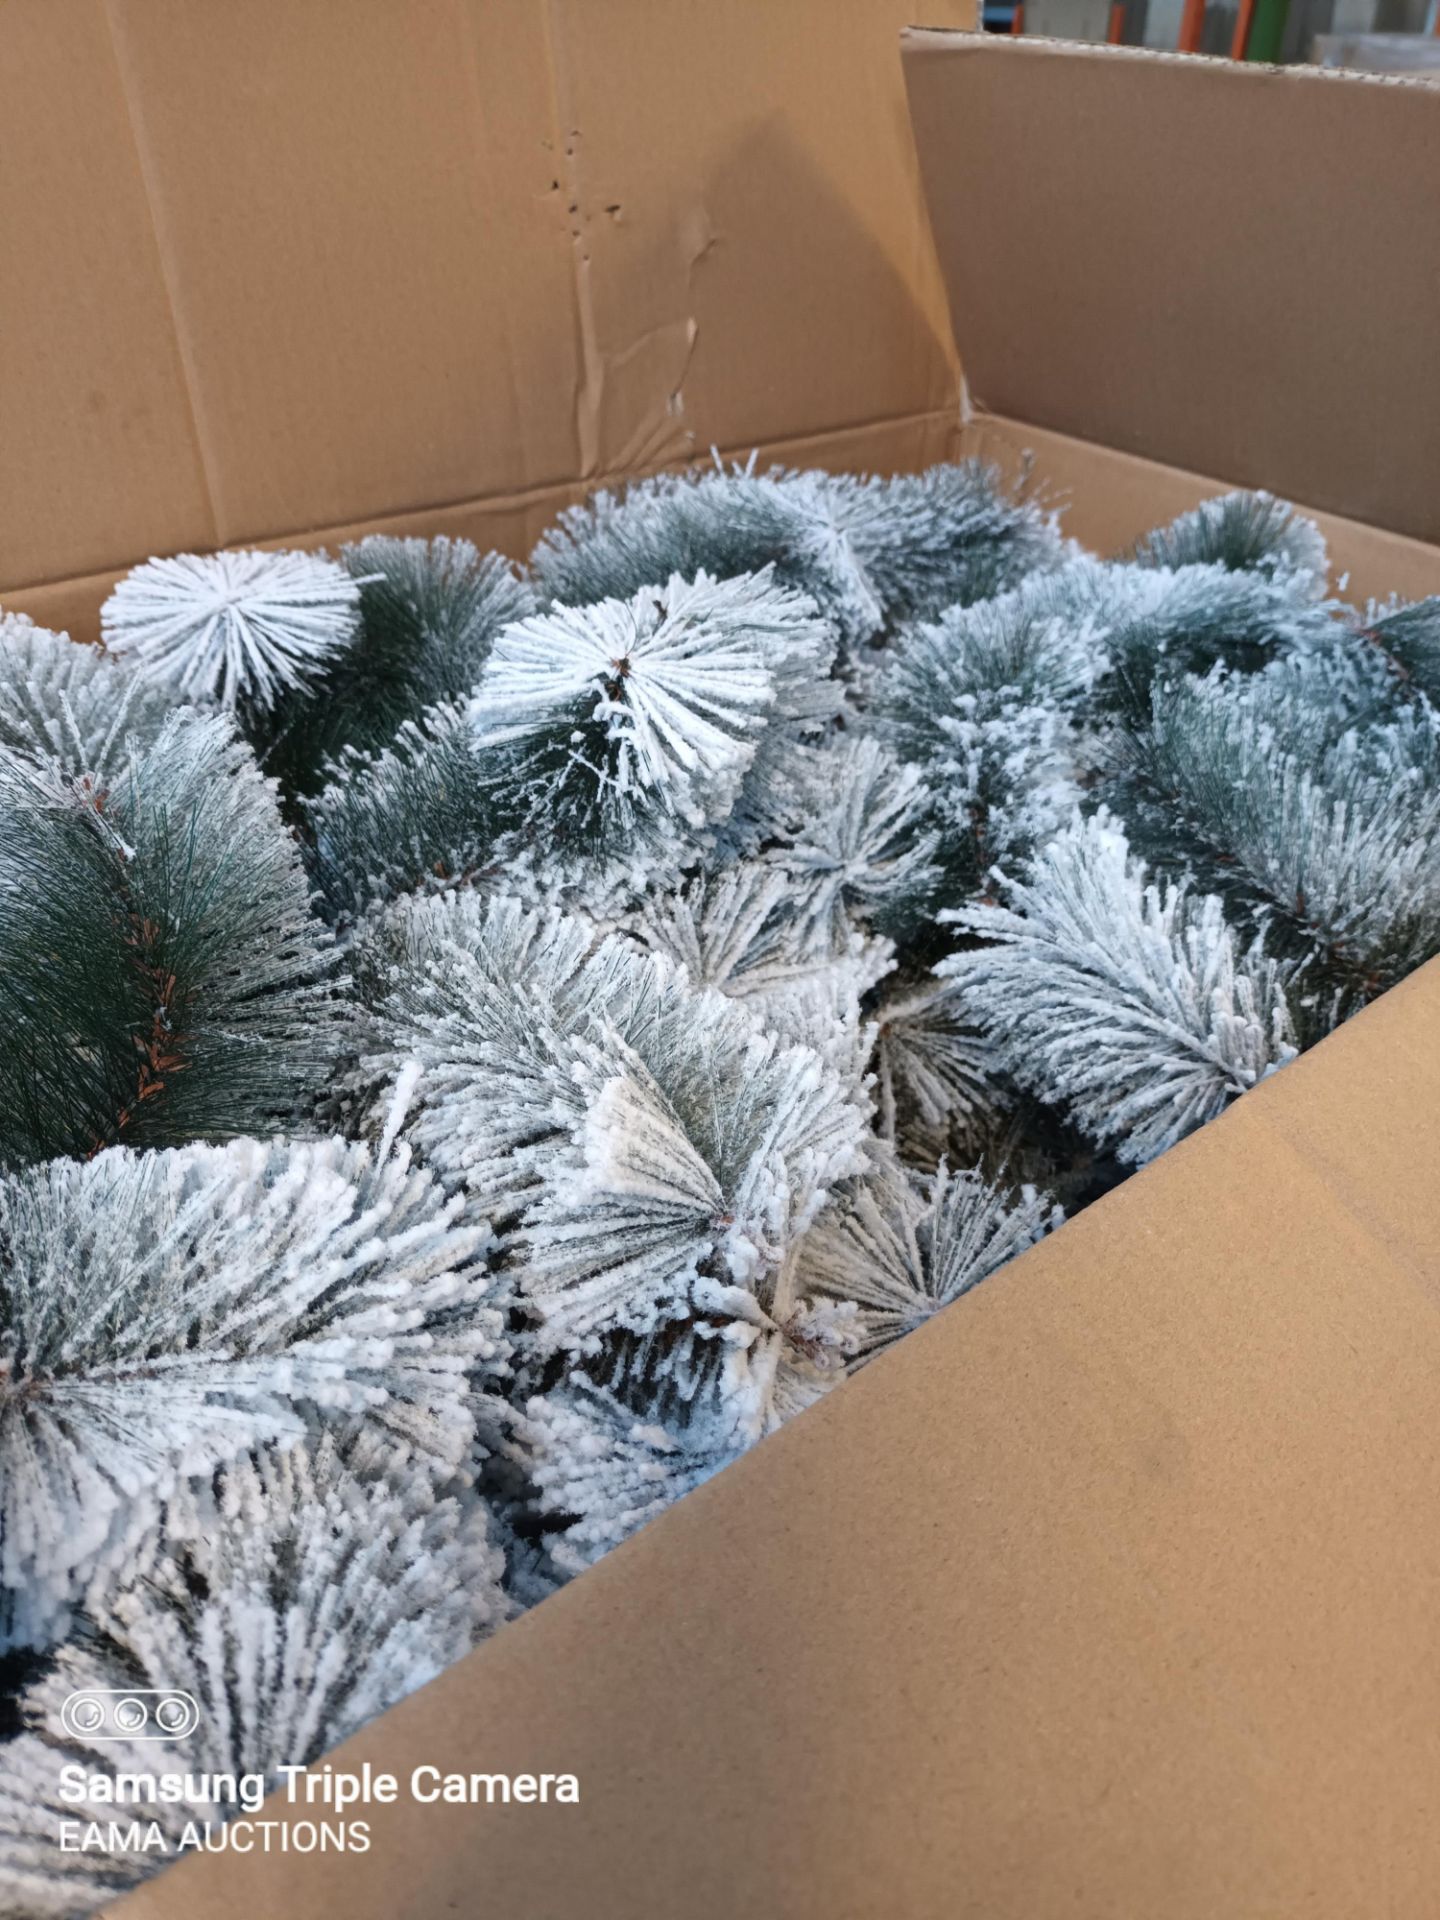 (L147) - 1 PALLET CONTAINING APPROX 6 BRAND NEW ARTIFICIAL XMAS TREES SNOW EFFECT